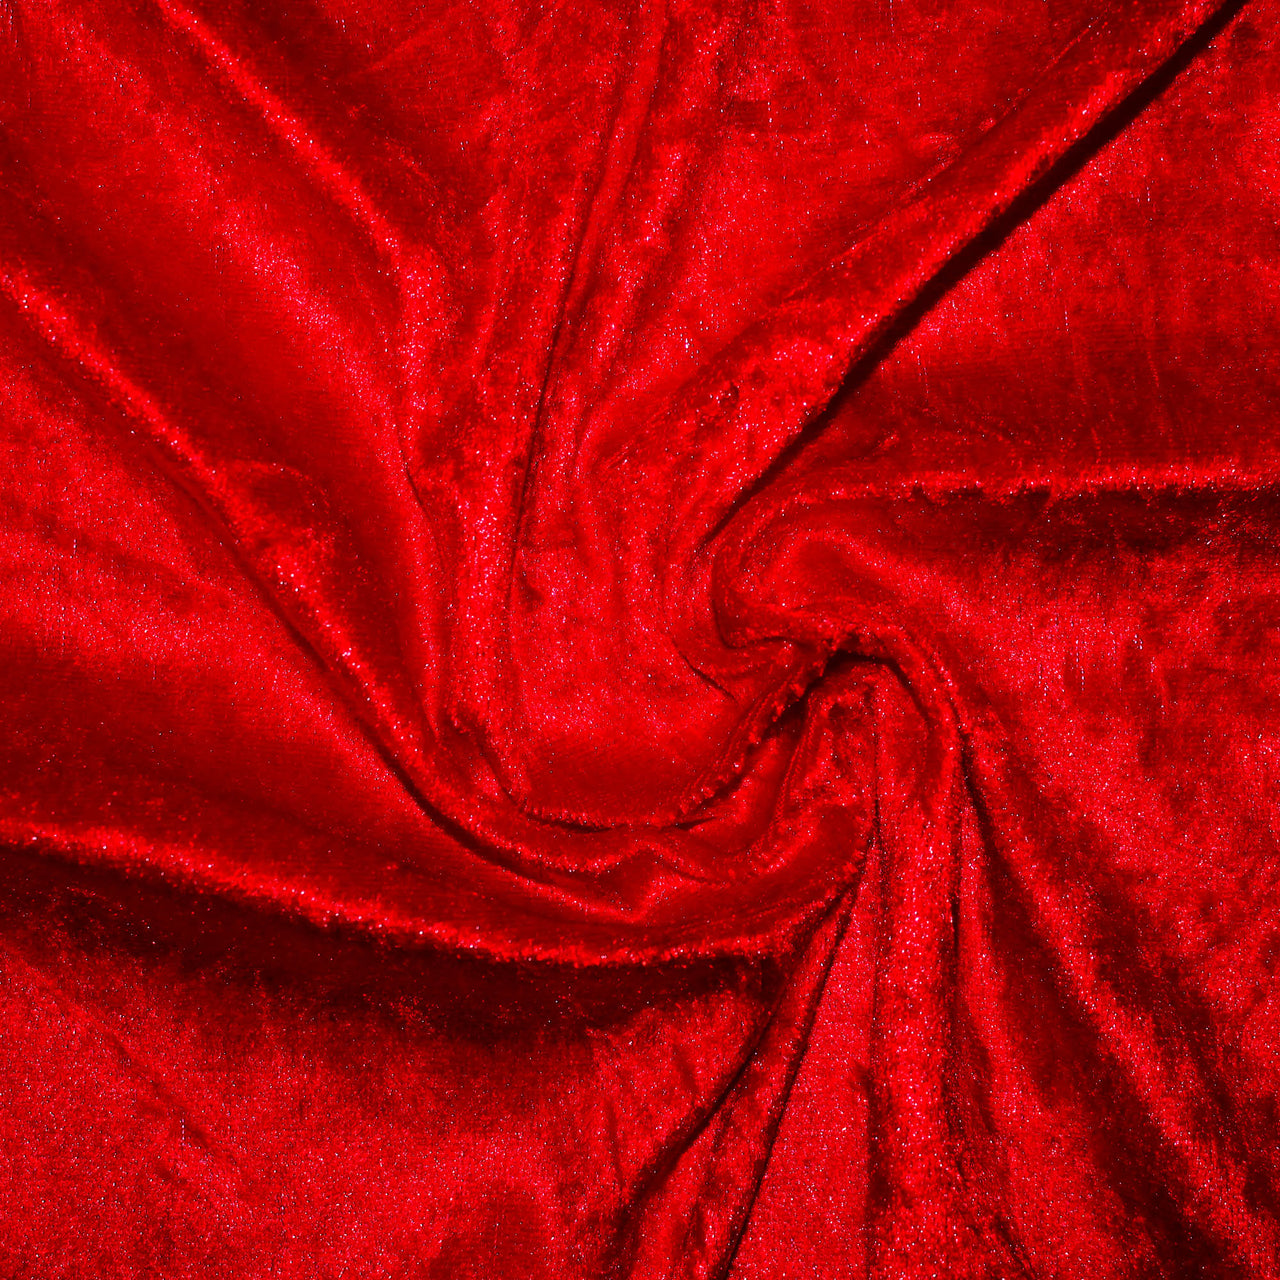 Red - Crushed Velvet Velour Fabric - Natural One Way Stretch For Costumes & Drapes